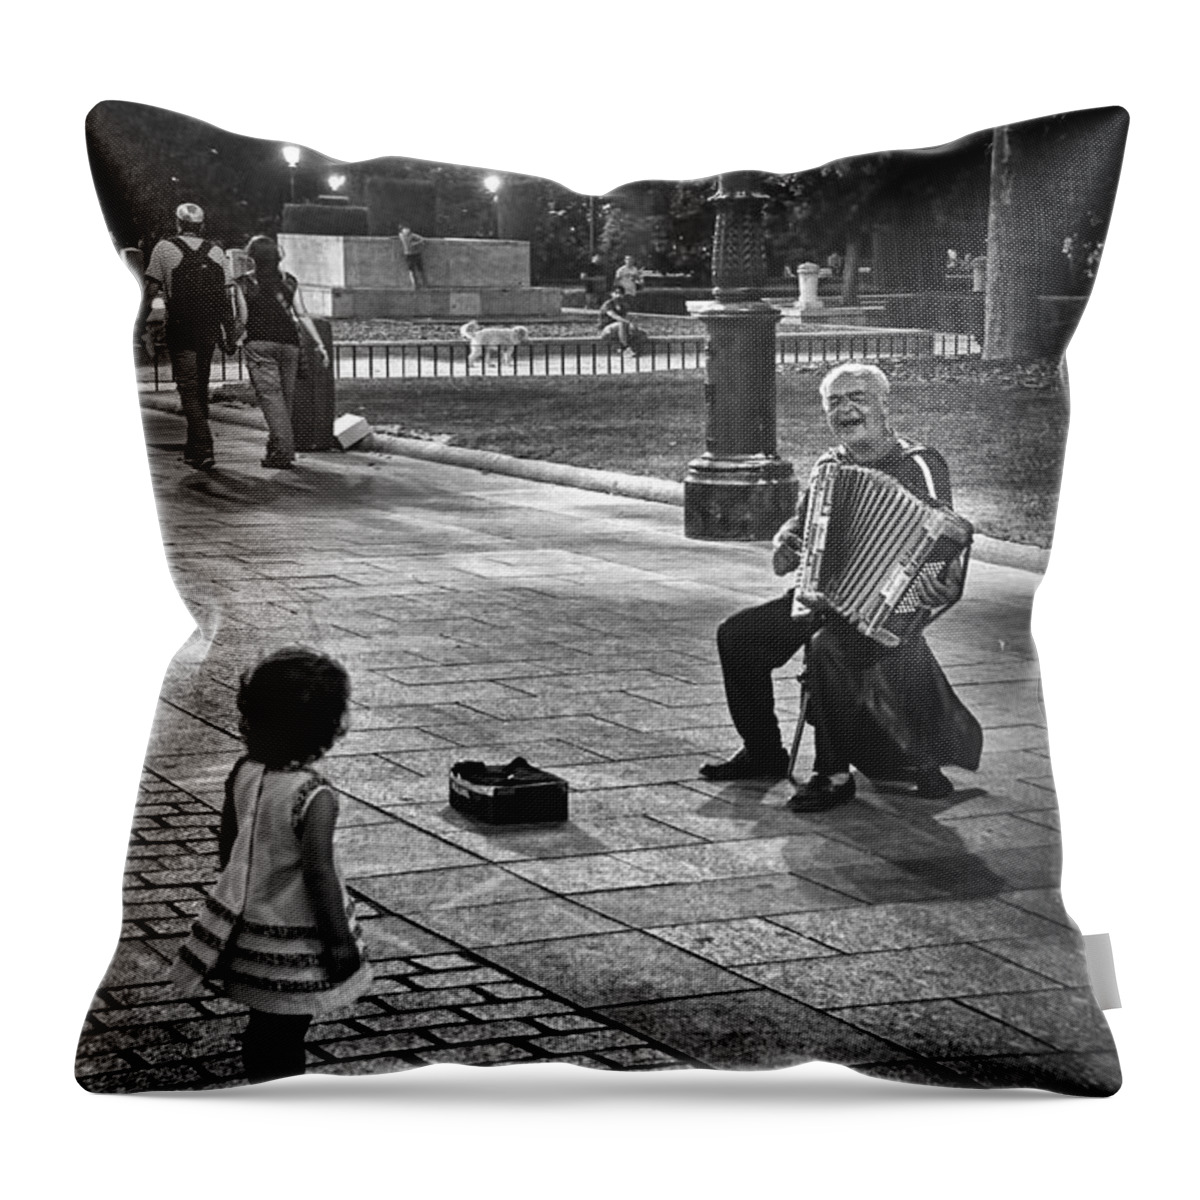 Accordion Throw Pillow featuring the photograph Street Performance by Tom Bell